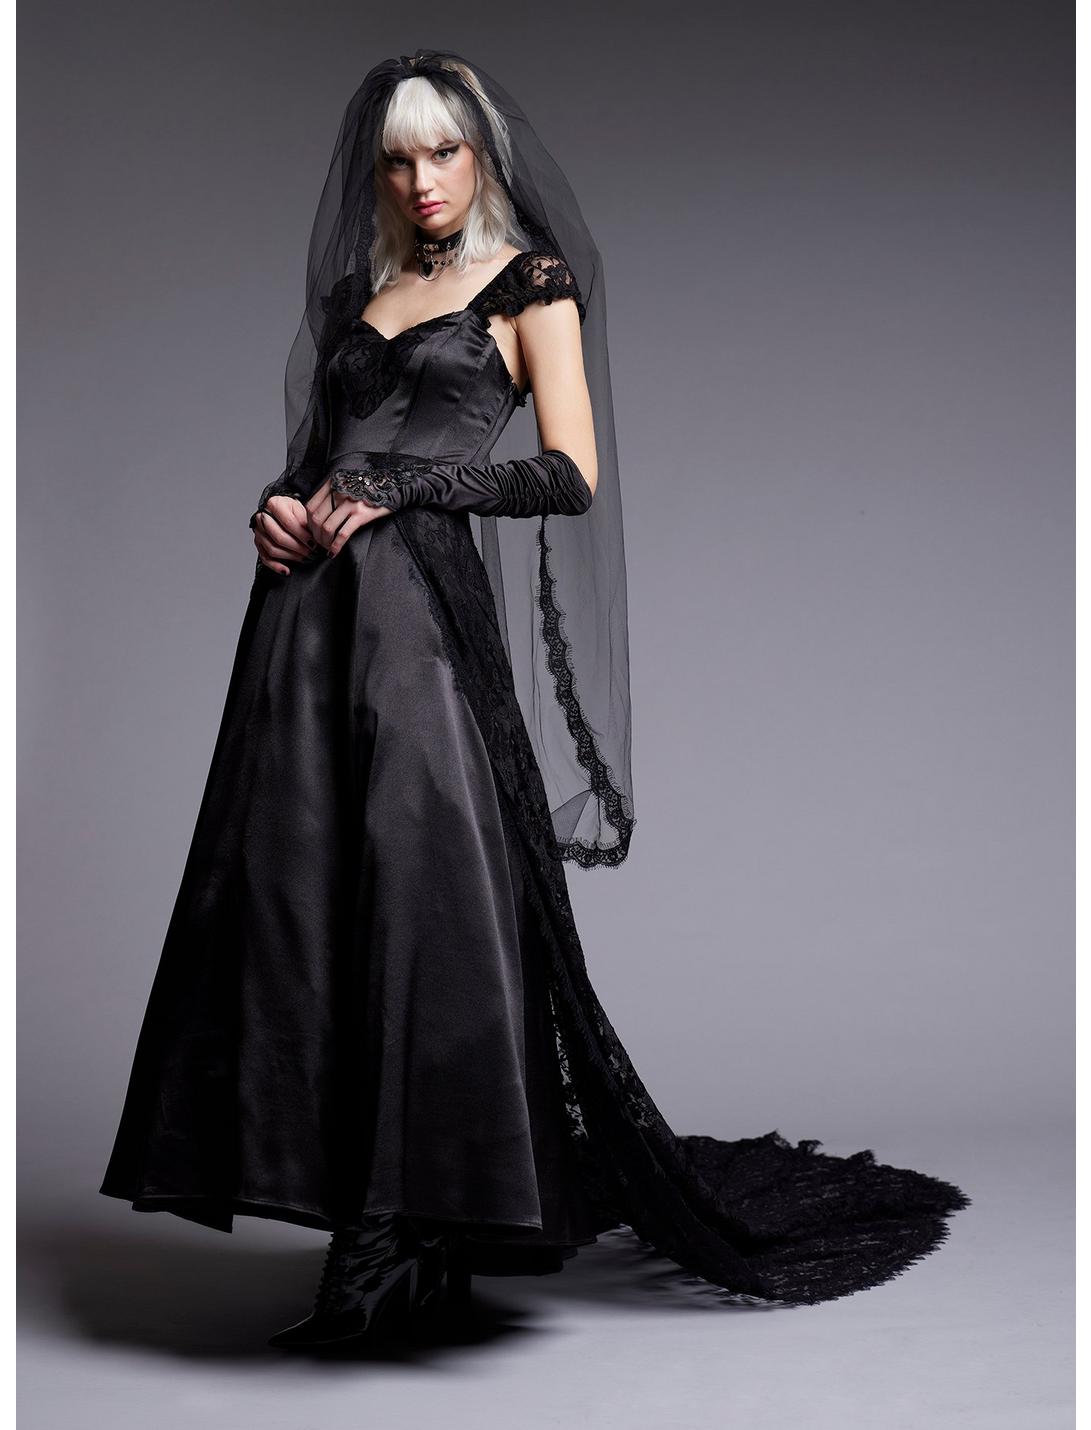 Black Lace Gothic Special Occasion Dress Limited Edition, BLACK, hi-res